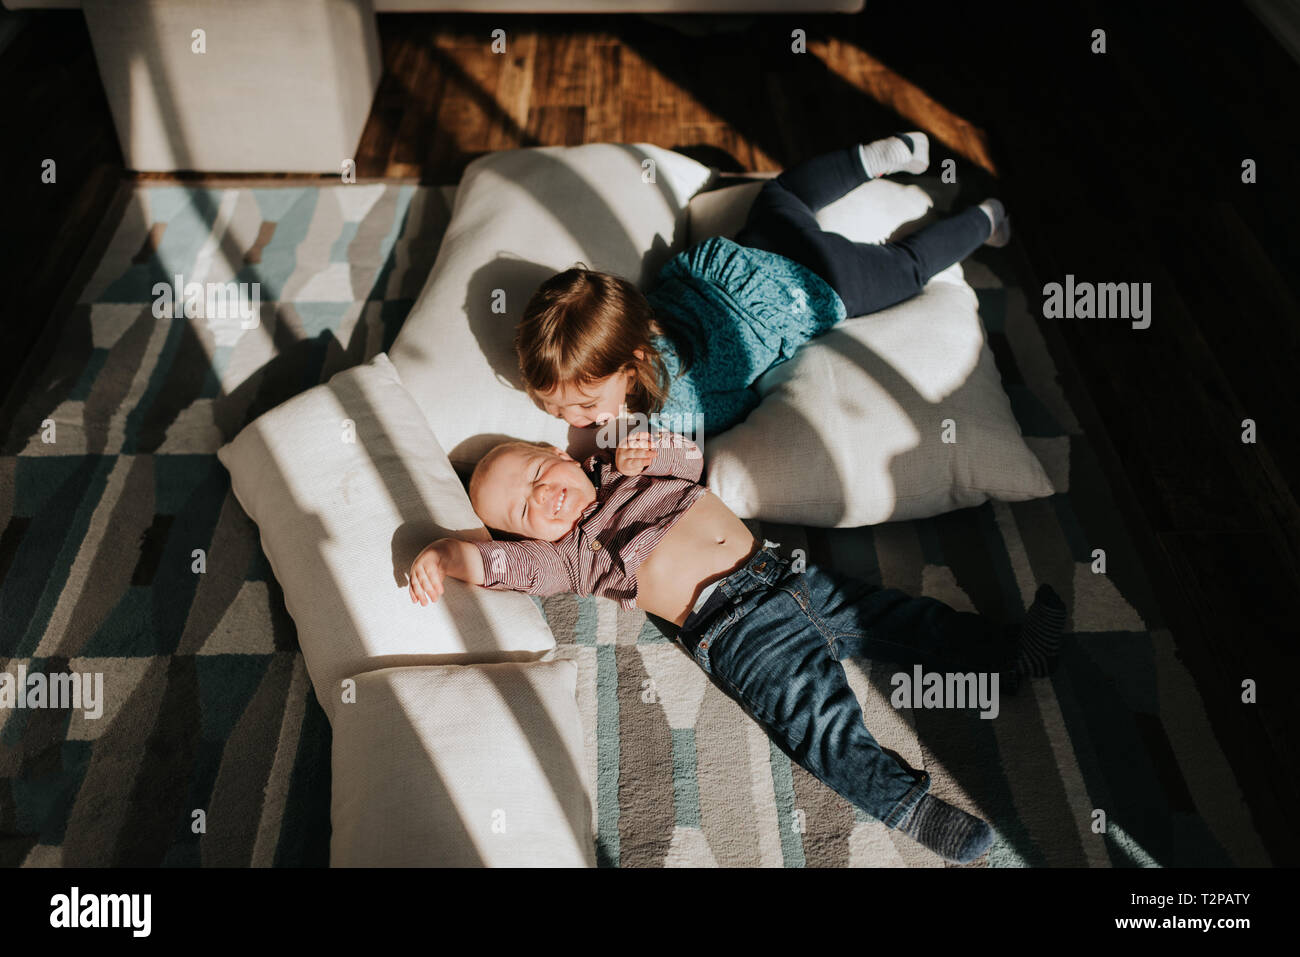 Baby boy and toddler sister lying on cushions on living room floor, overhead view Stock Photo